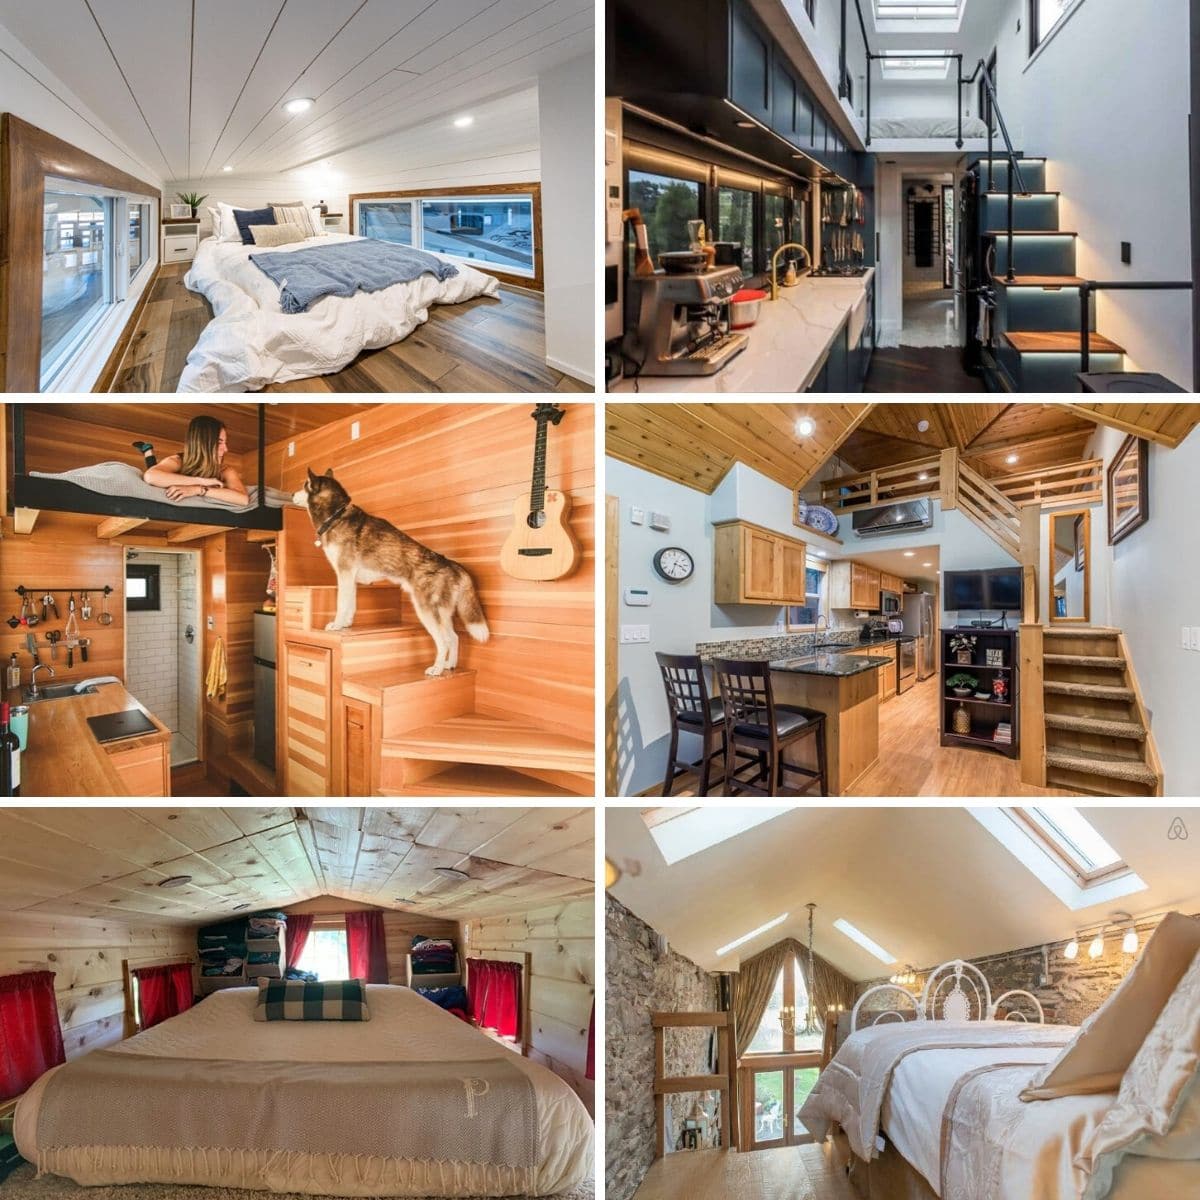 Tiny Houses With The Most Amazing Lofts, How To Add Privacy A Loft Bedroom More Privately